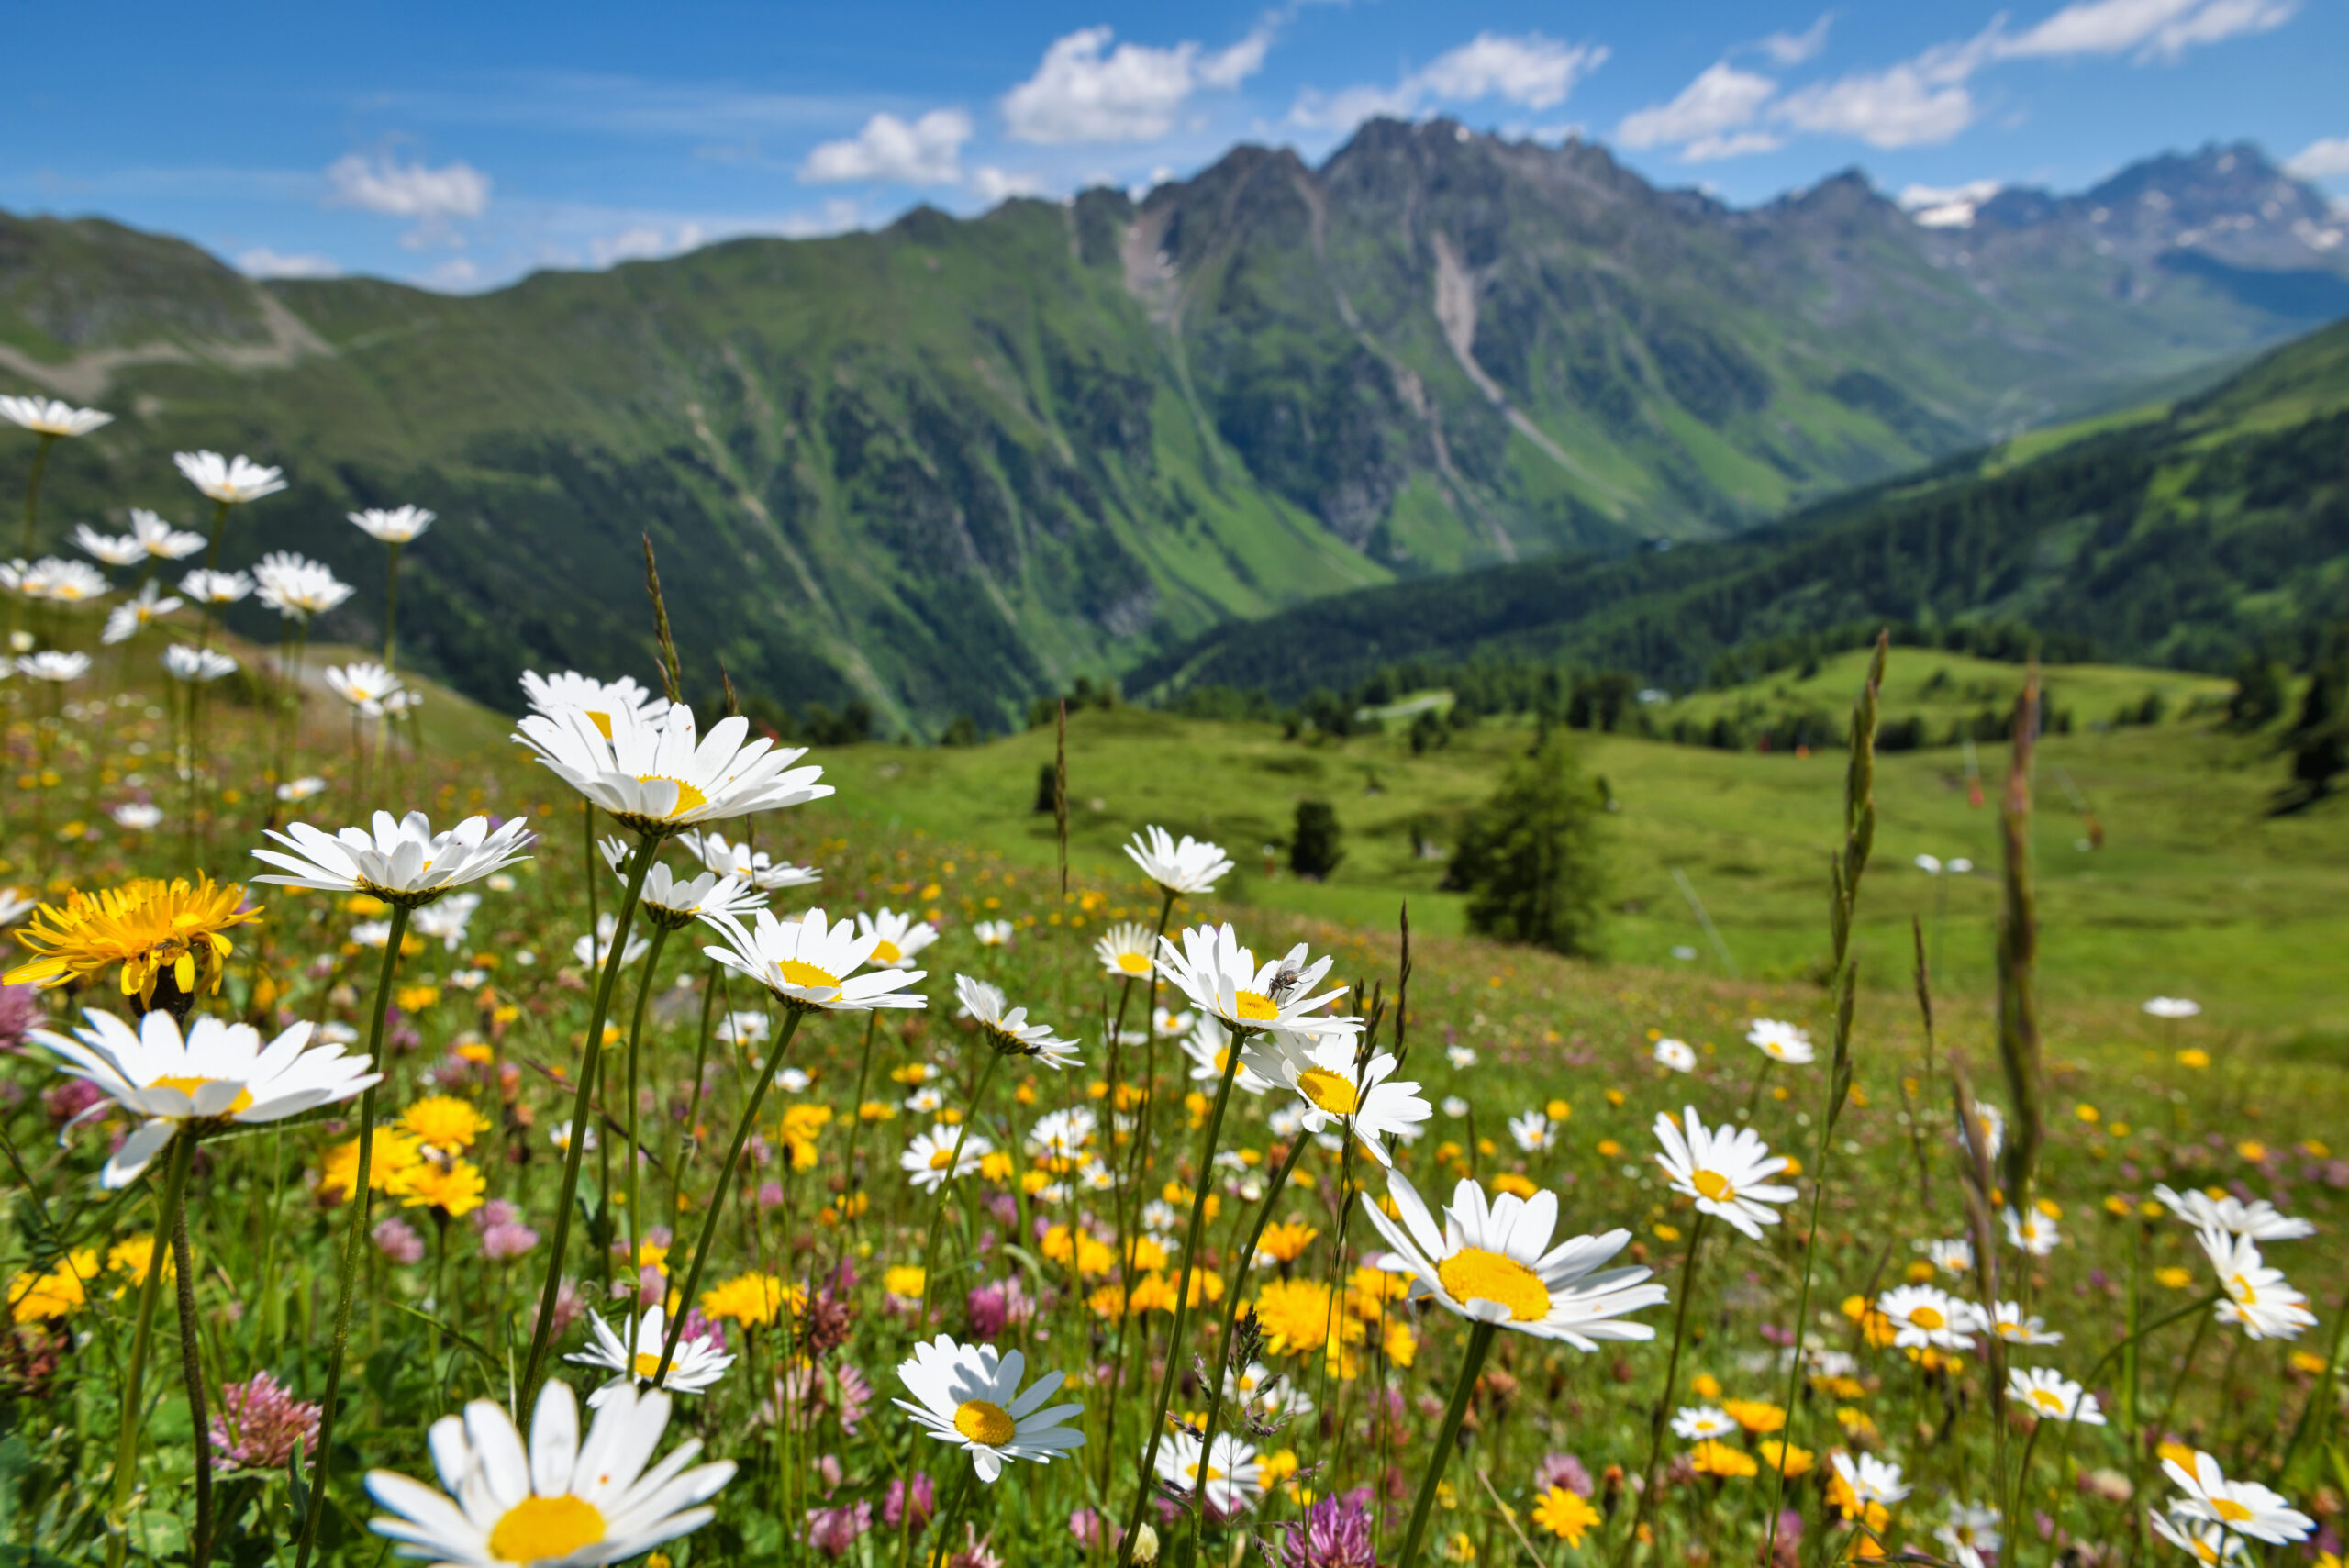 Beautiful flowering alpine meadows in the background mountains and sky with clouds.